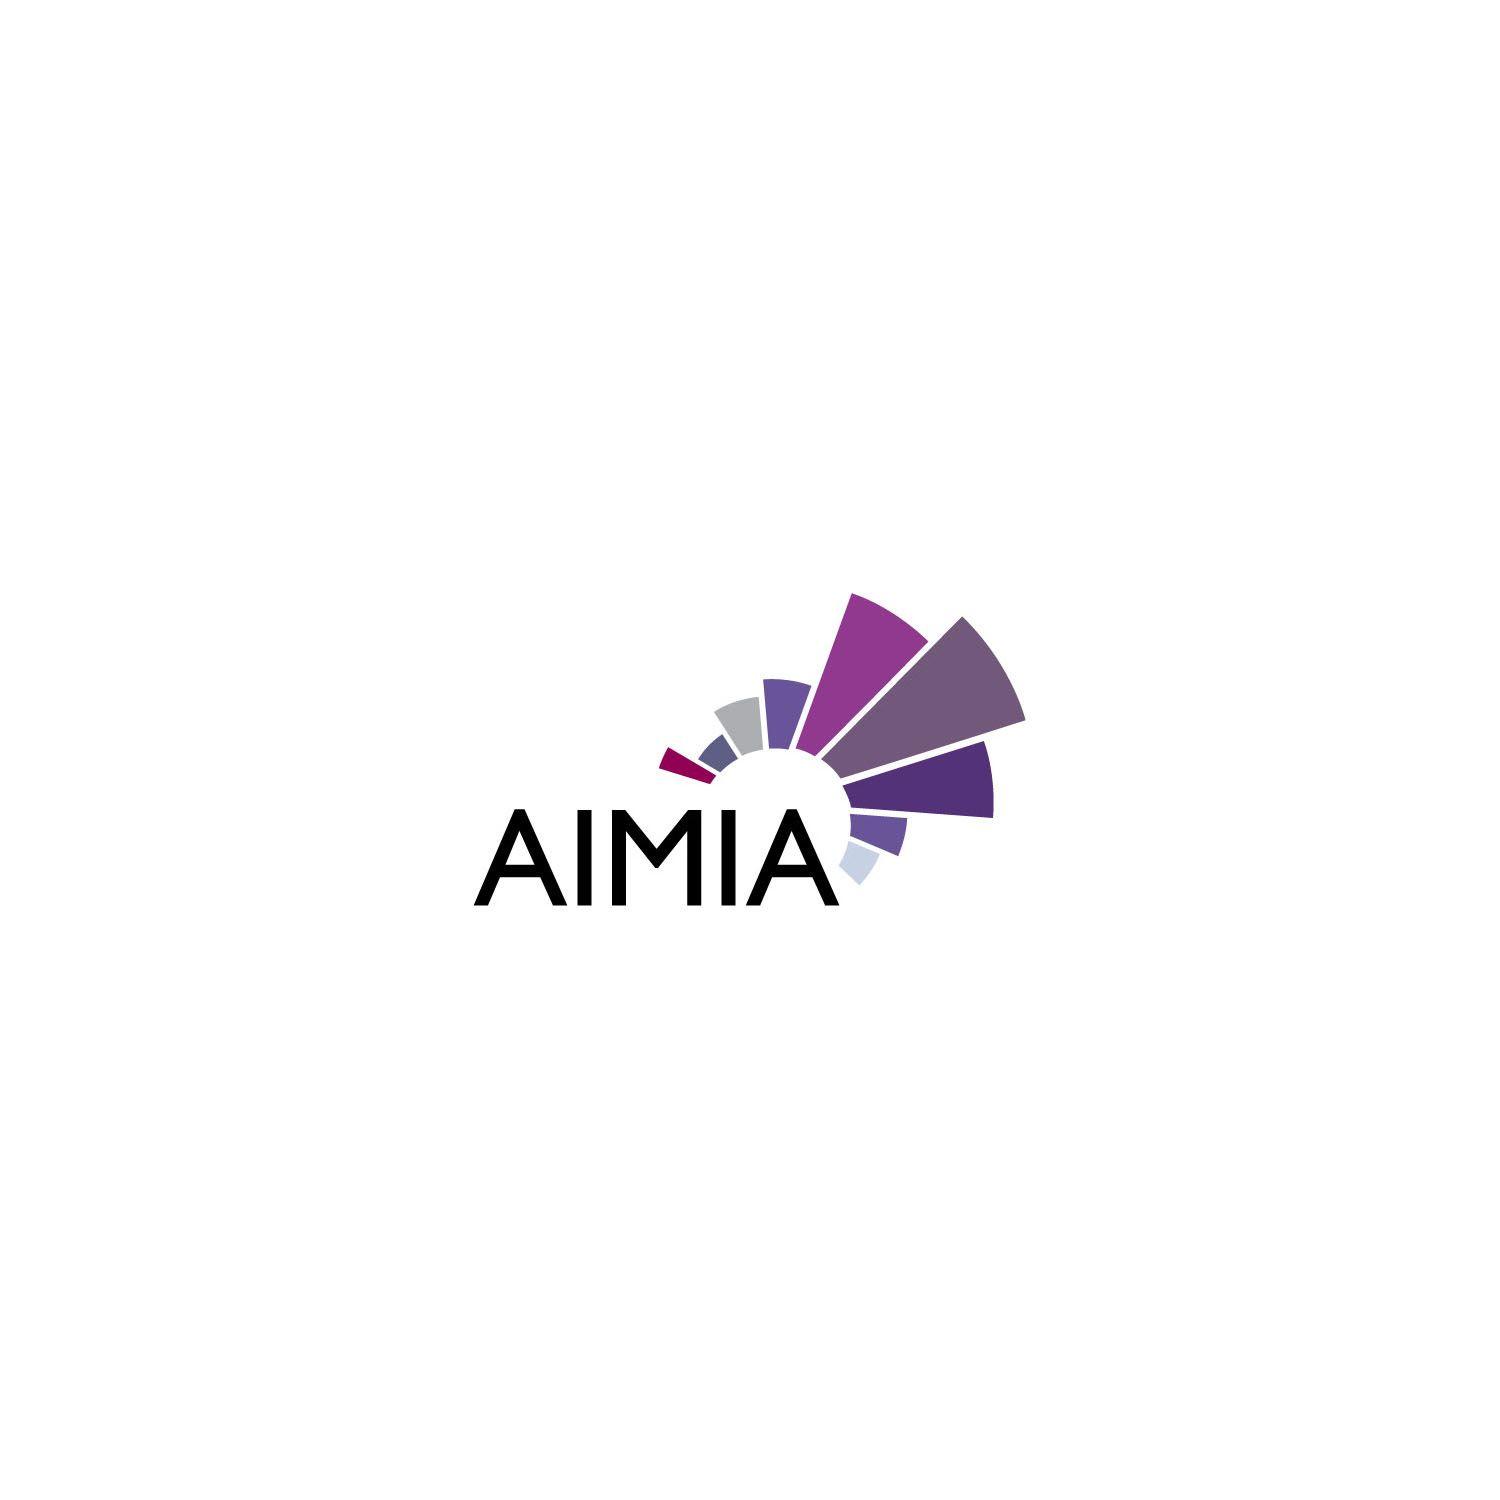 Aimia Logo - AIMIA encourages and supports the digital industry and acts as a